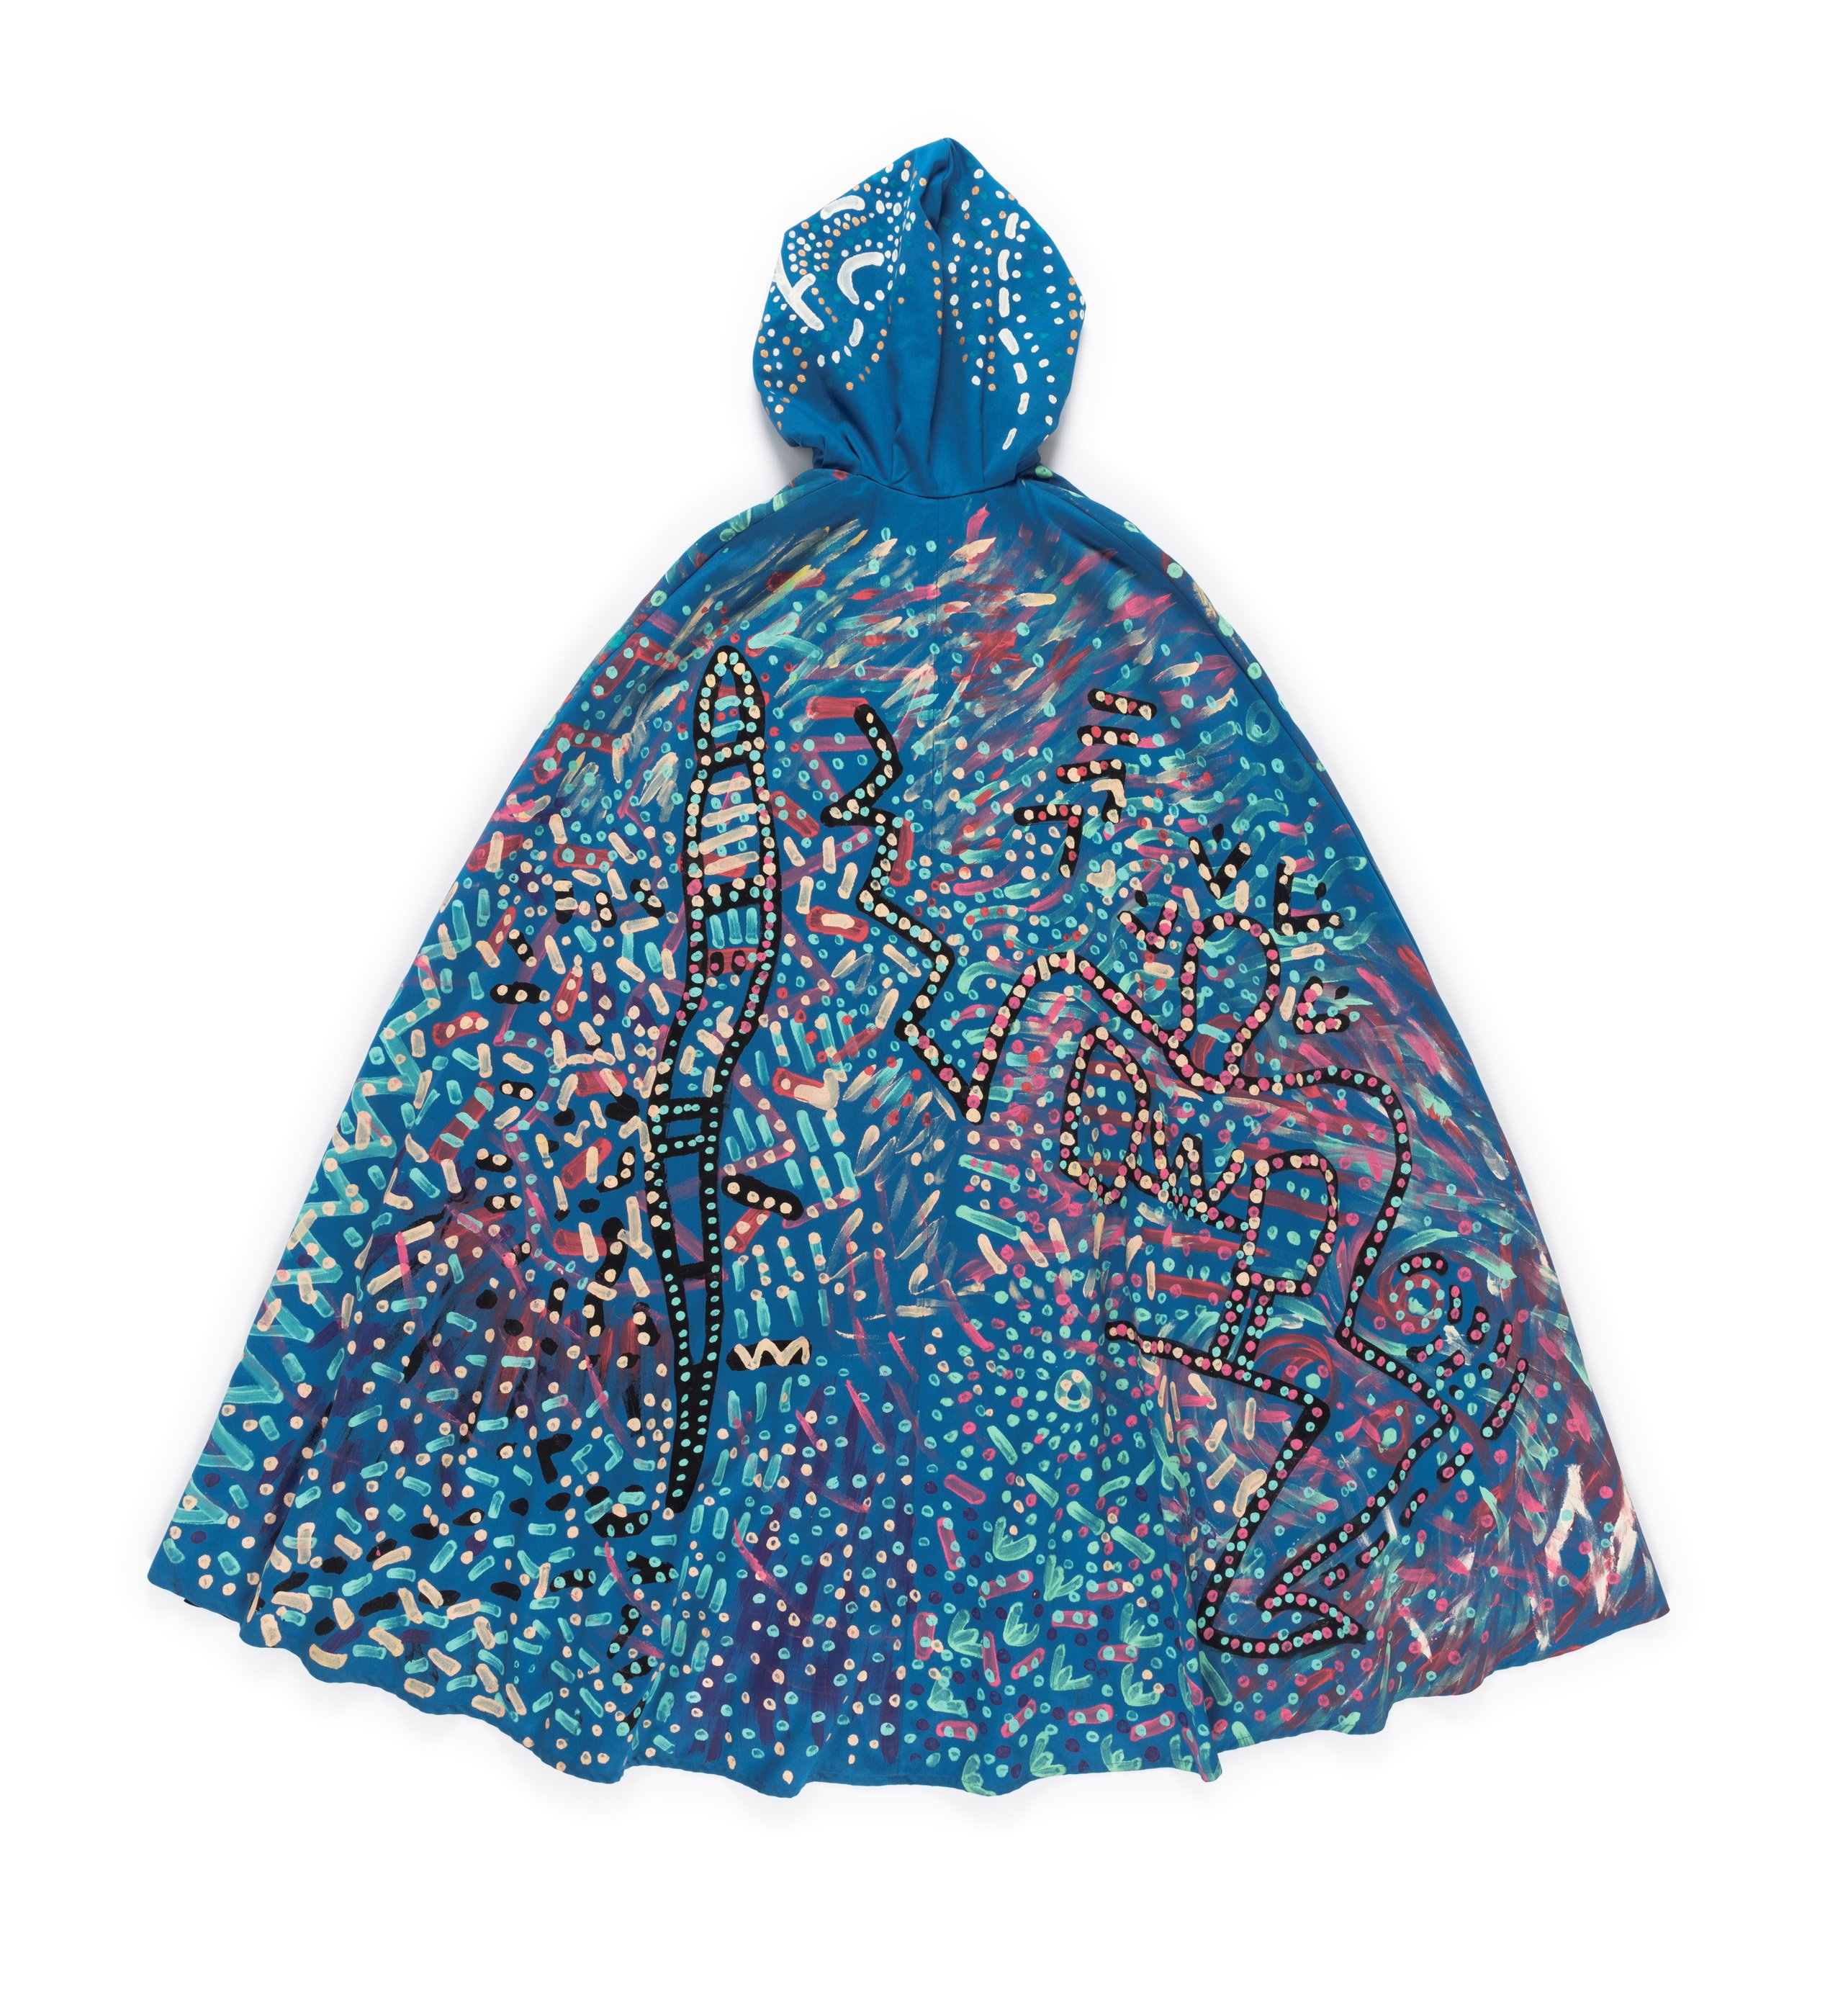 Handpainted 'Cycle of Life' opera cape by Bronwyn Bancroft